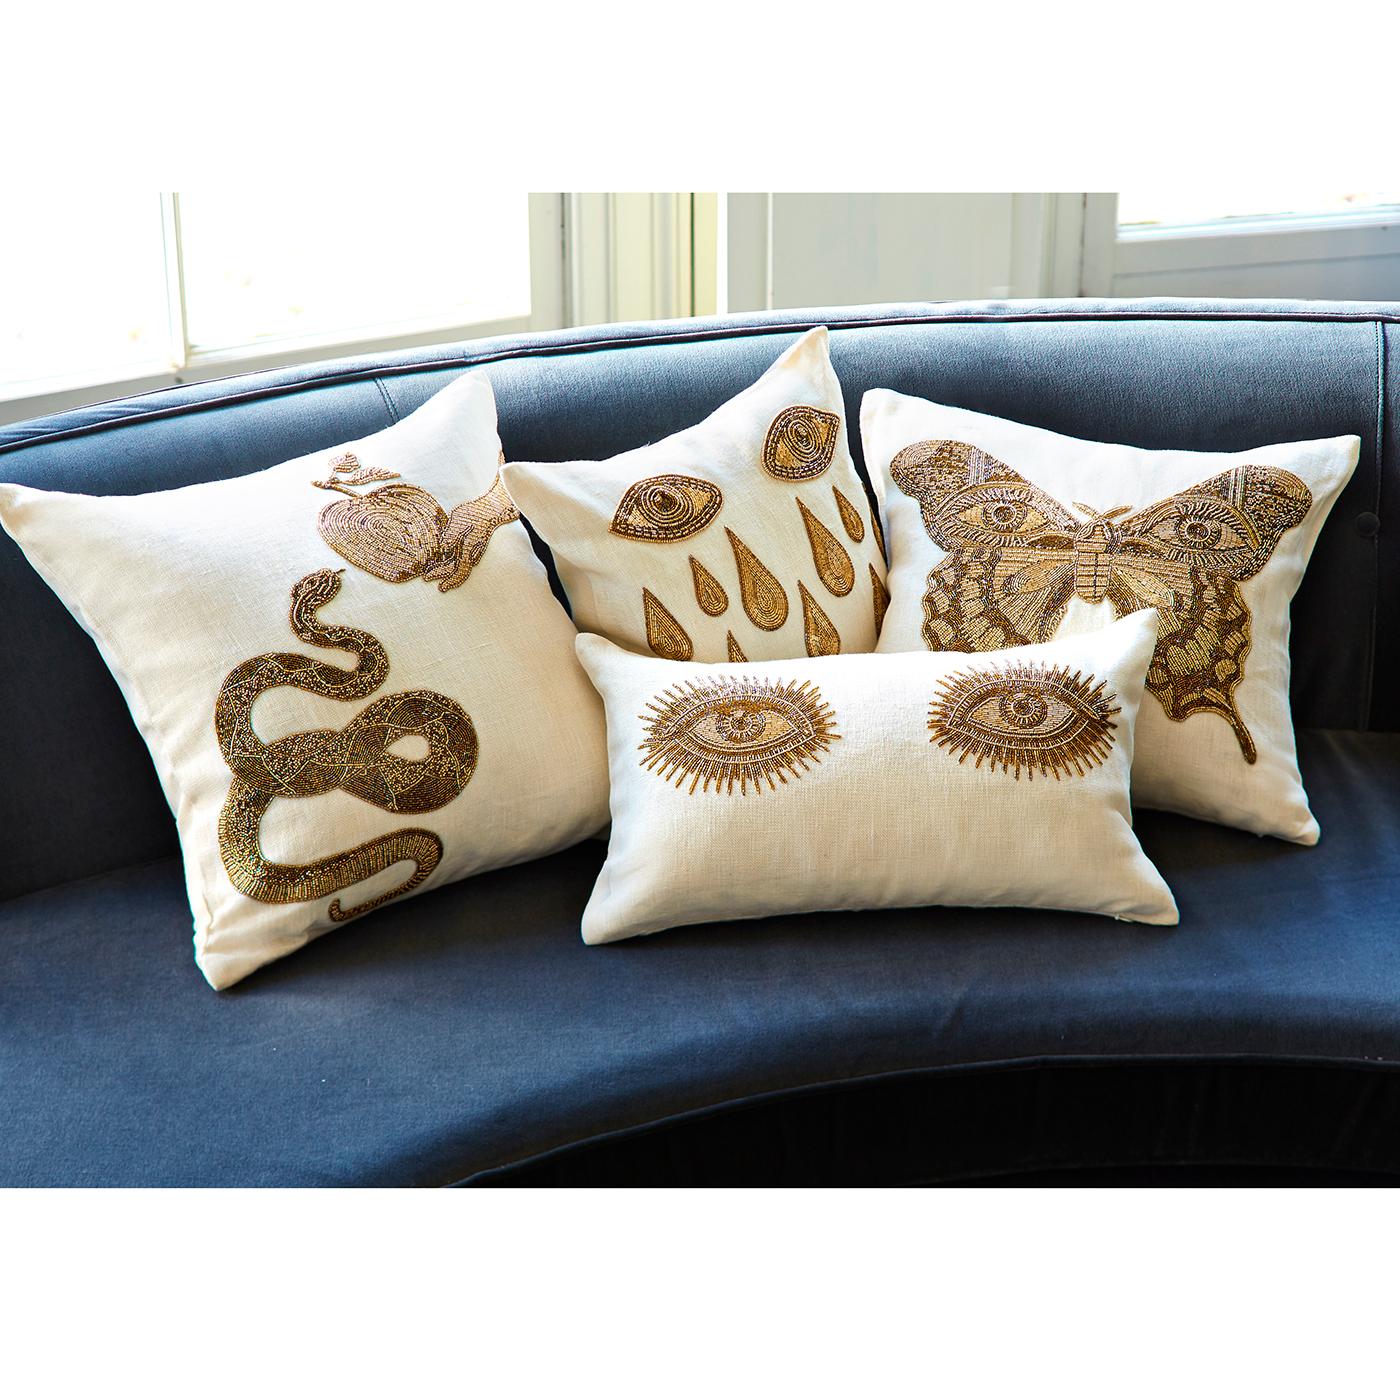 Surreal style. Handcrafted intricate gold beadwork embroidered on chunky ivory linen, our Muse Pillows are the perfect mix of the decadence of Halston and the madness of Dali. Crafty, couture, and exotic, these pillows will remind your guests